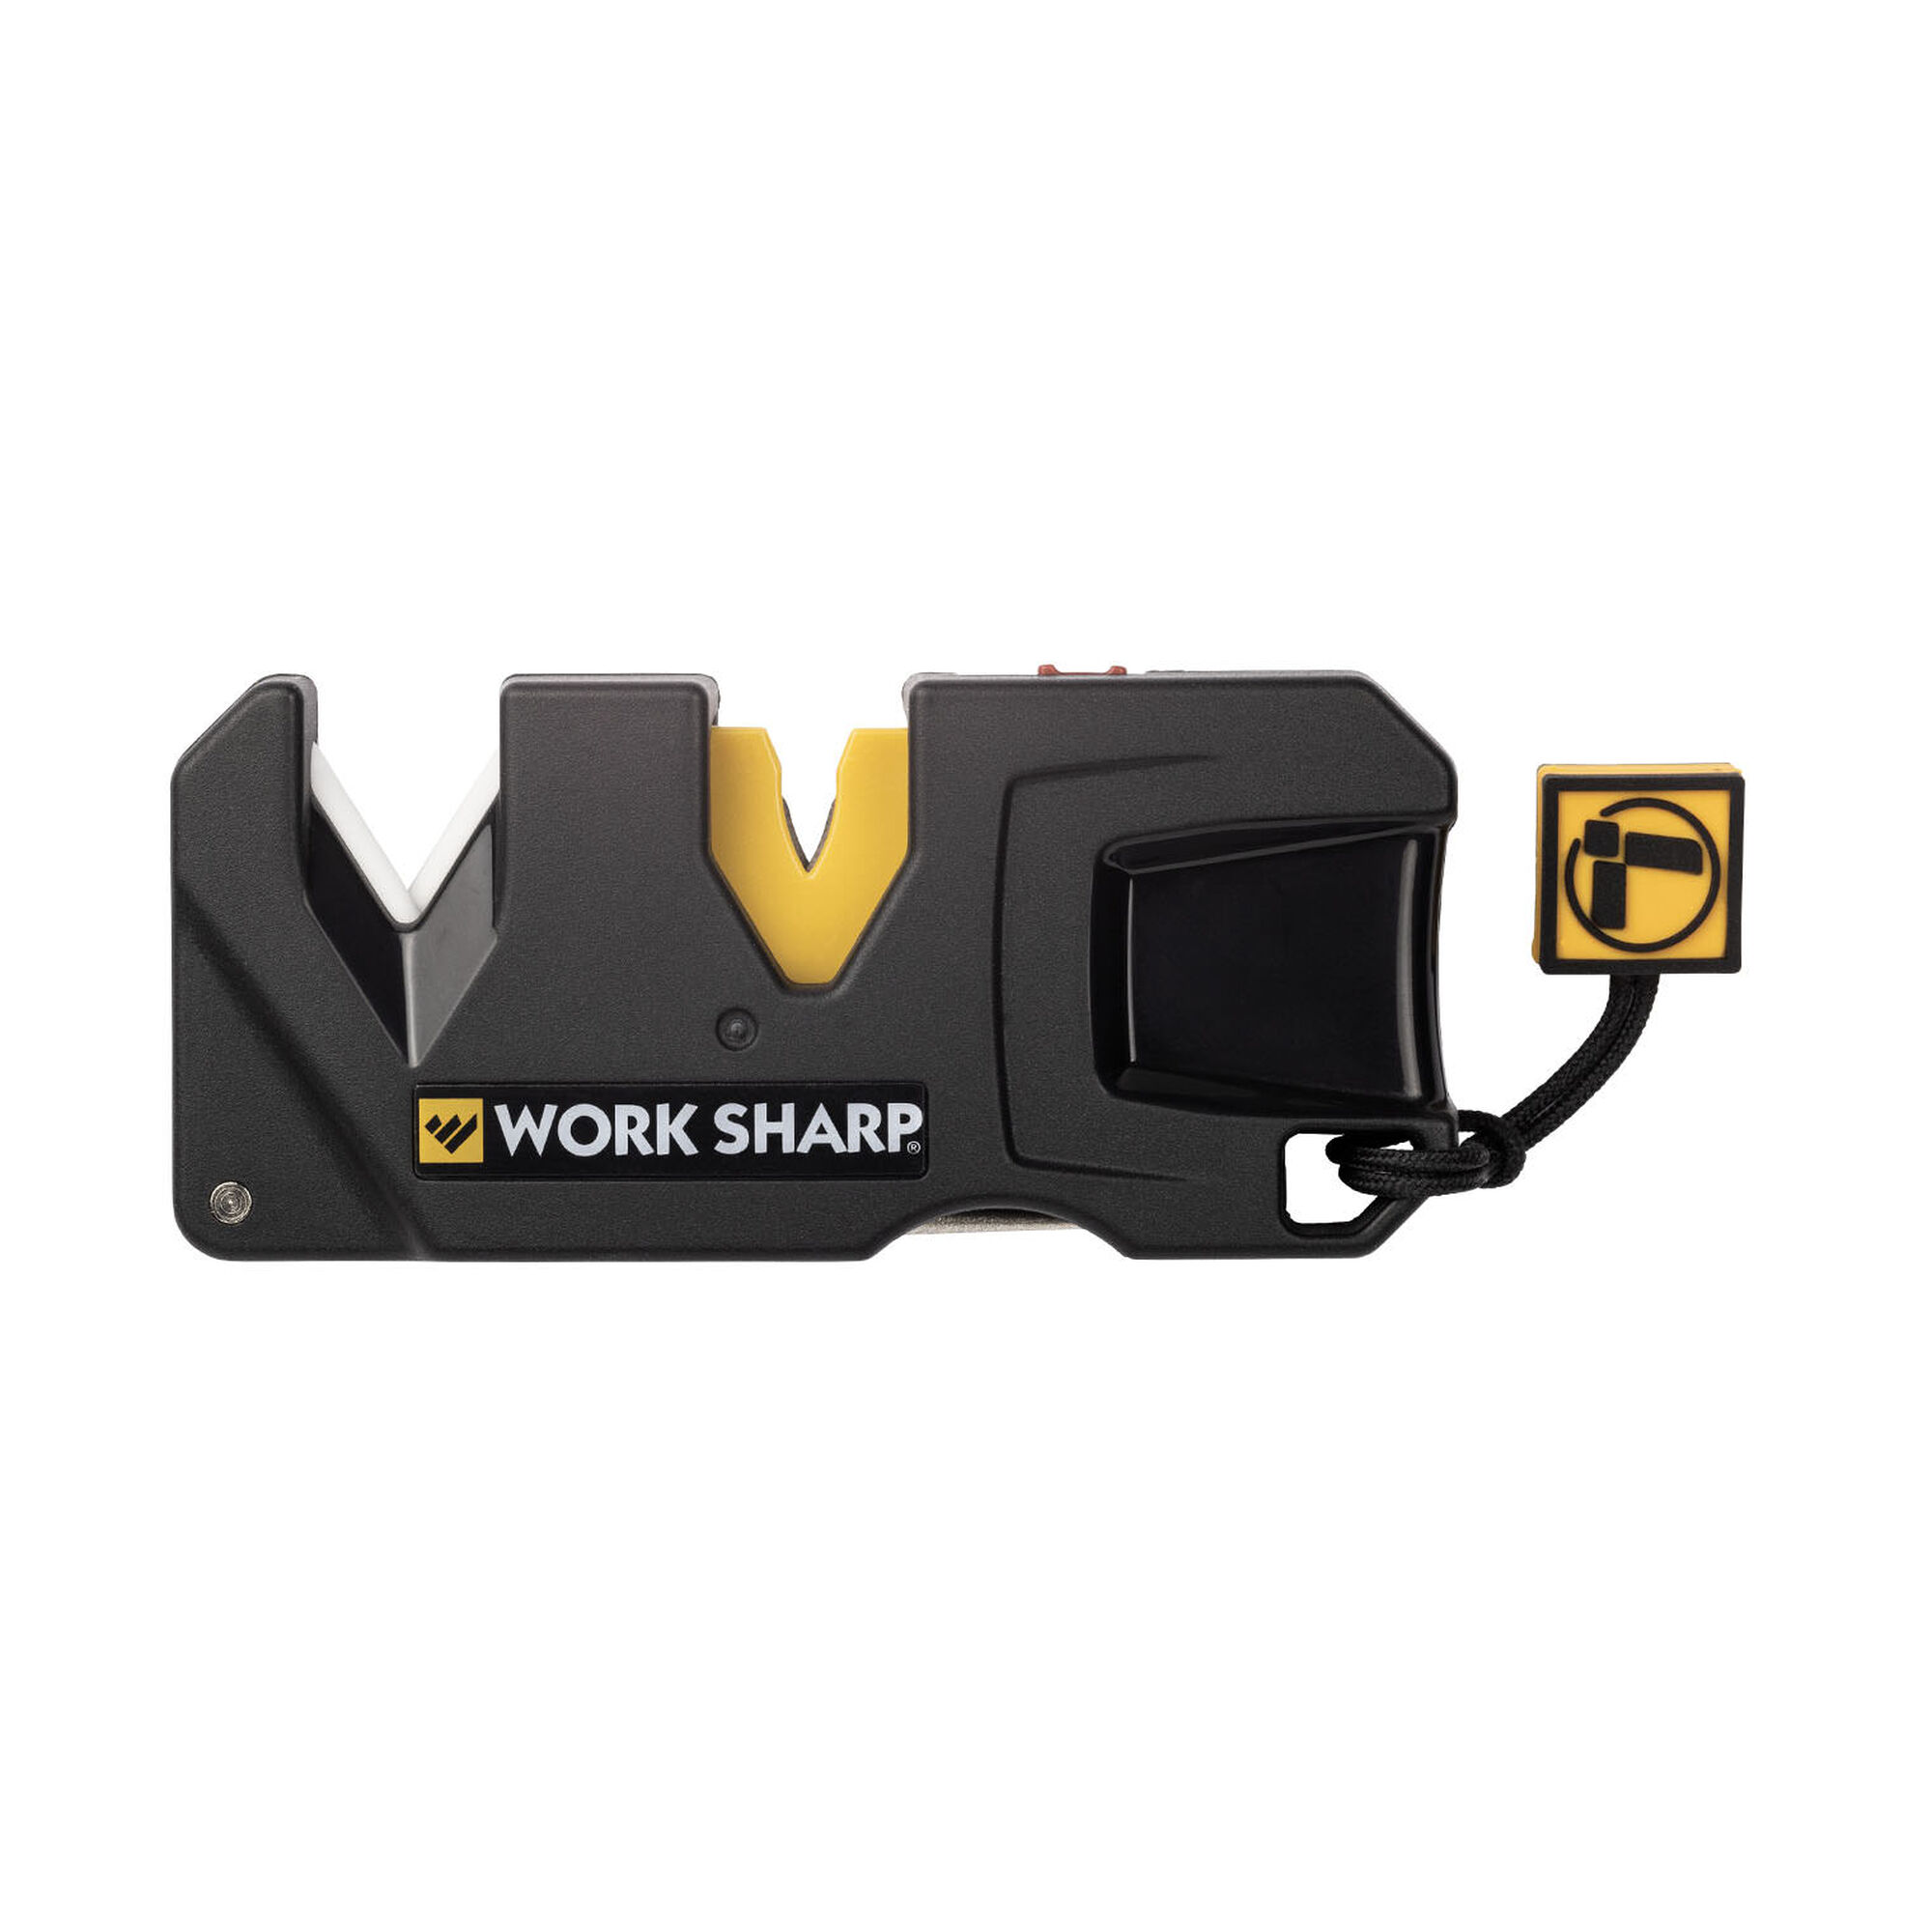 Accessories Category Page - Work Sharp Sharpeners